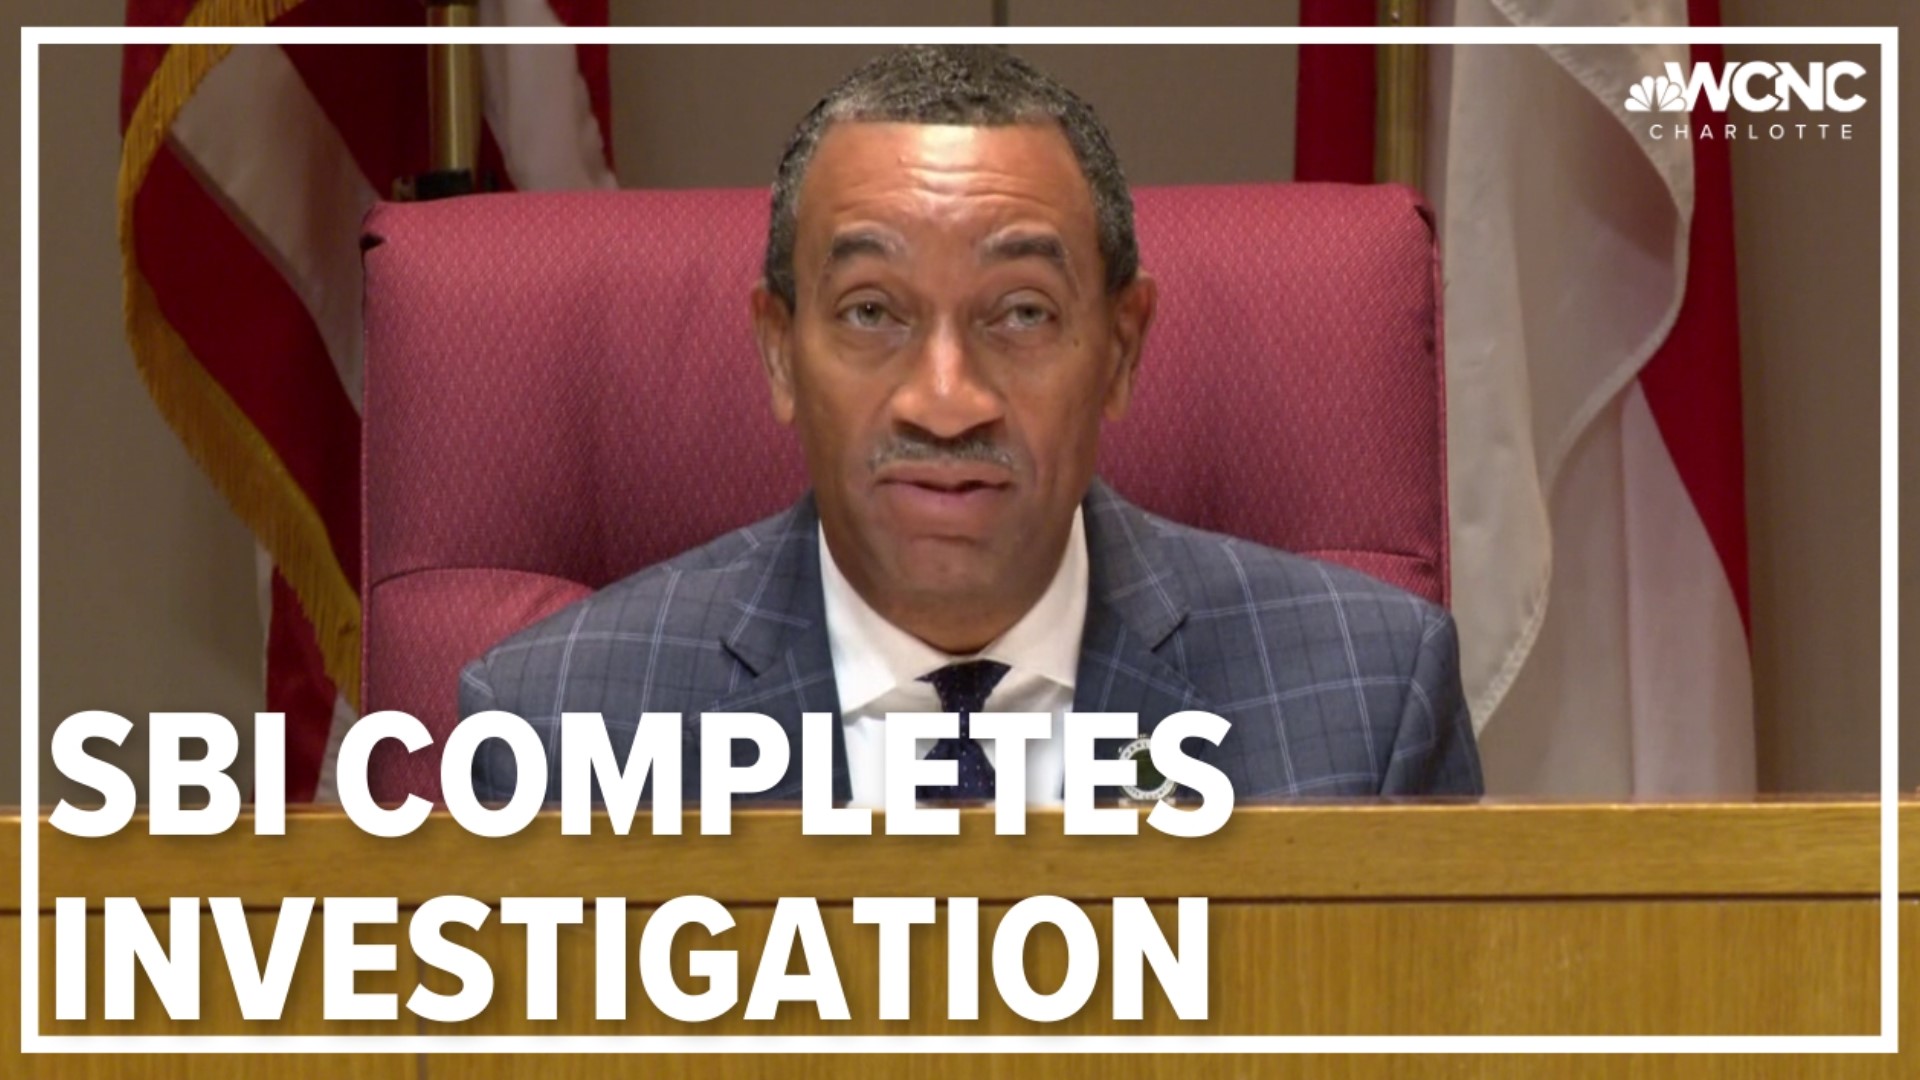 The North Carolina State Bureau of Investigation (SBI) told WCNC Charlotte on Wednesday that the agency's investigation on James "Smuggie" Mitchell was complete.